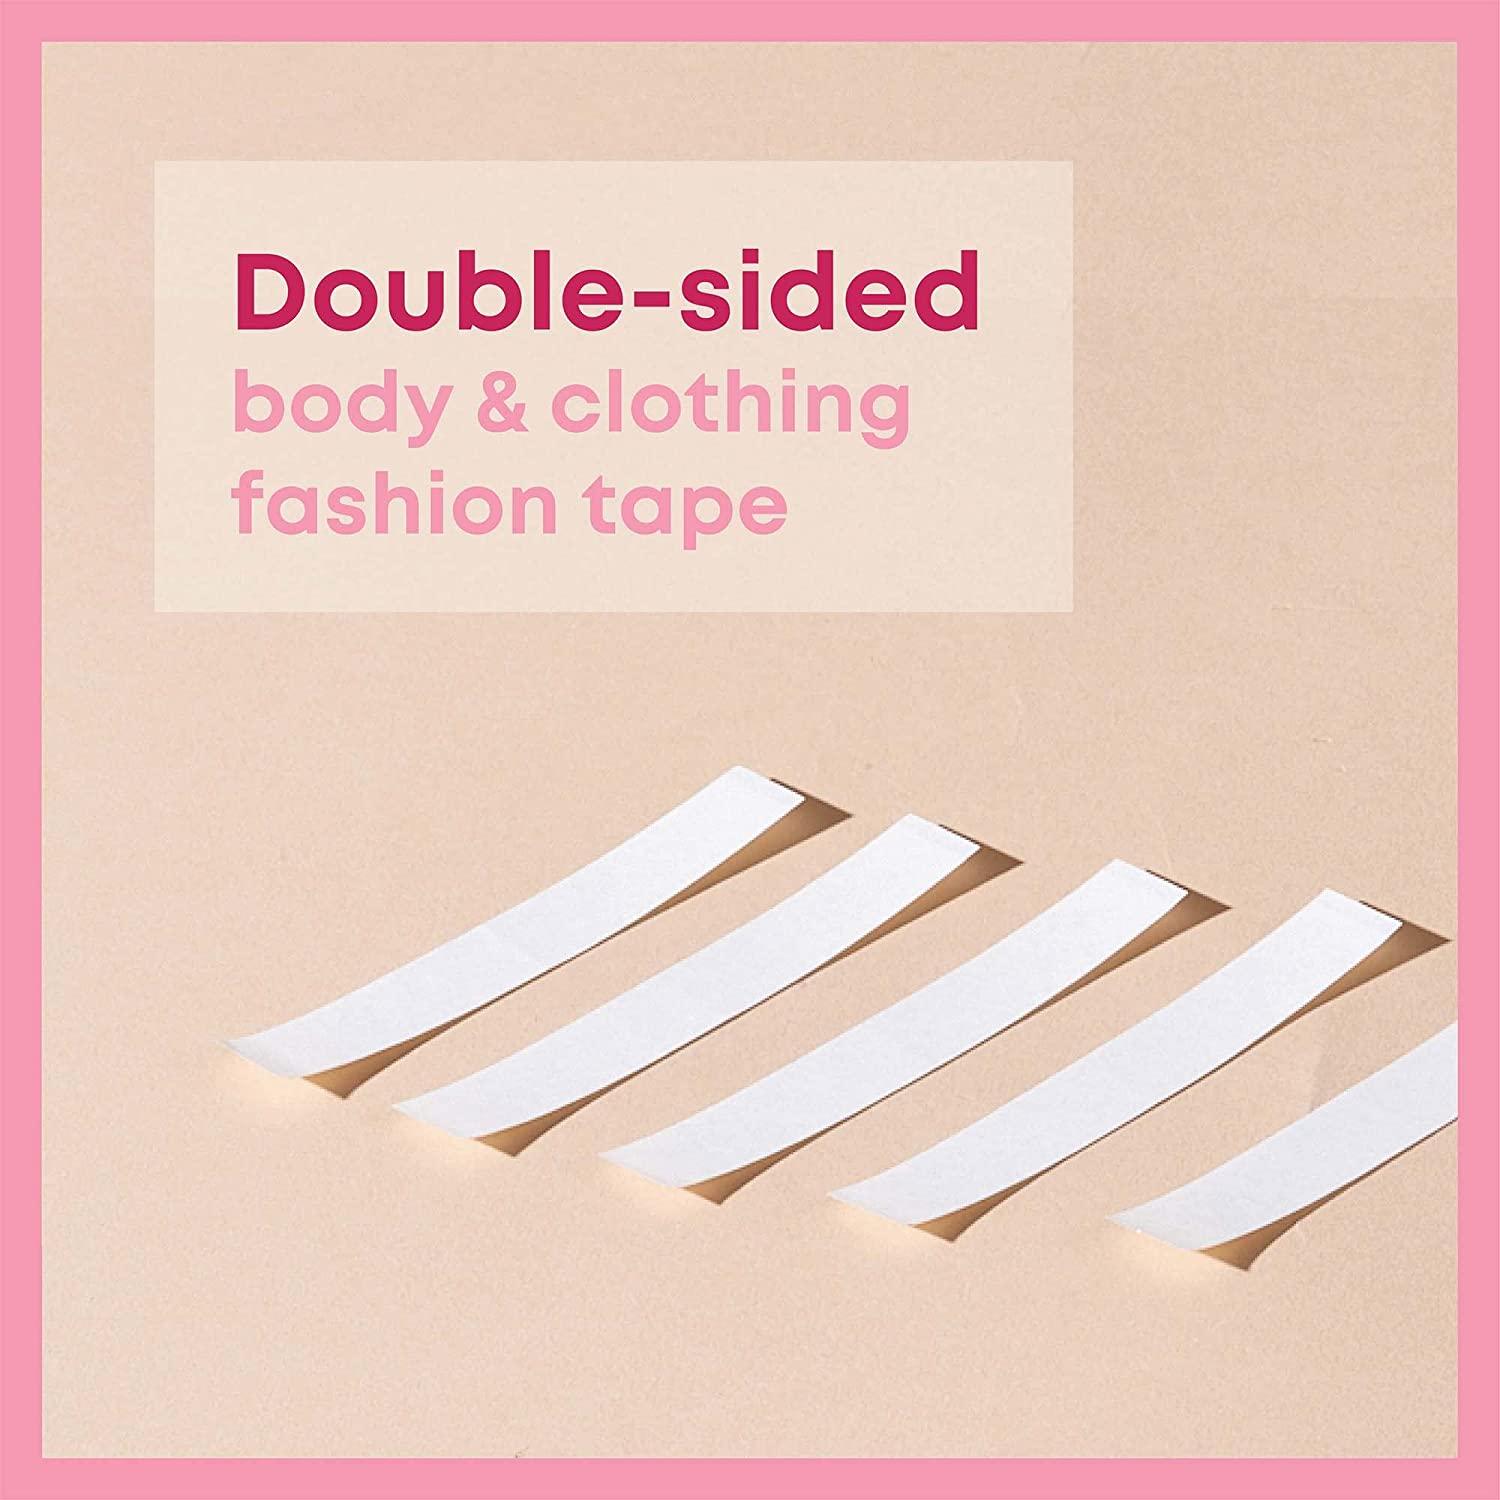 Double Sided Tape for Fashion, Clothing and Body (50 Strip Pack), Transparent Clear Color for All Skin Shades